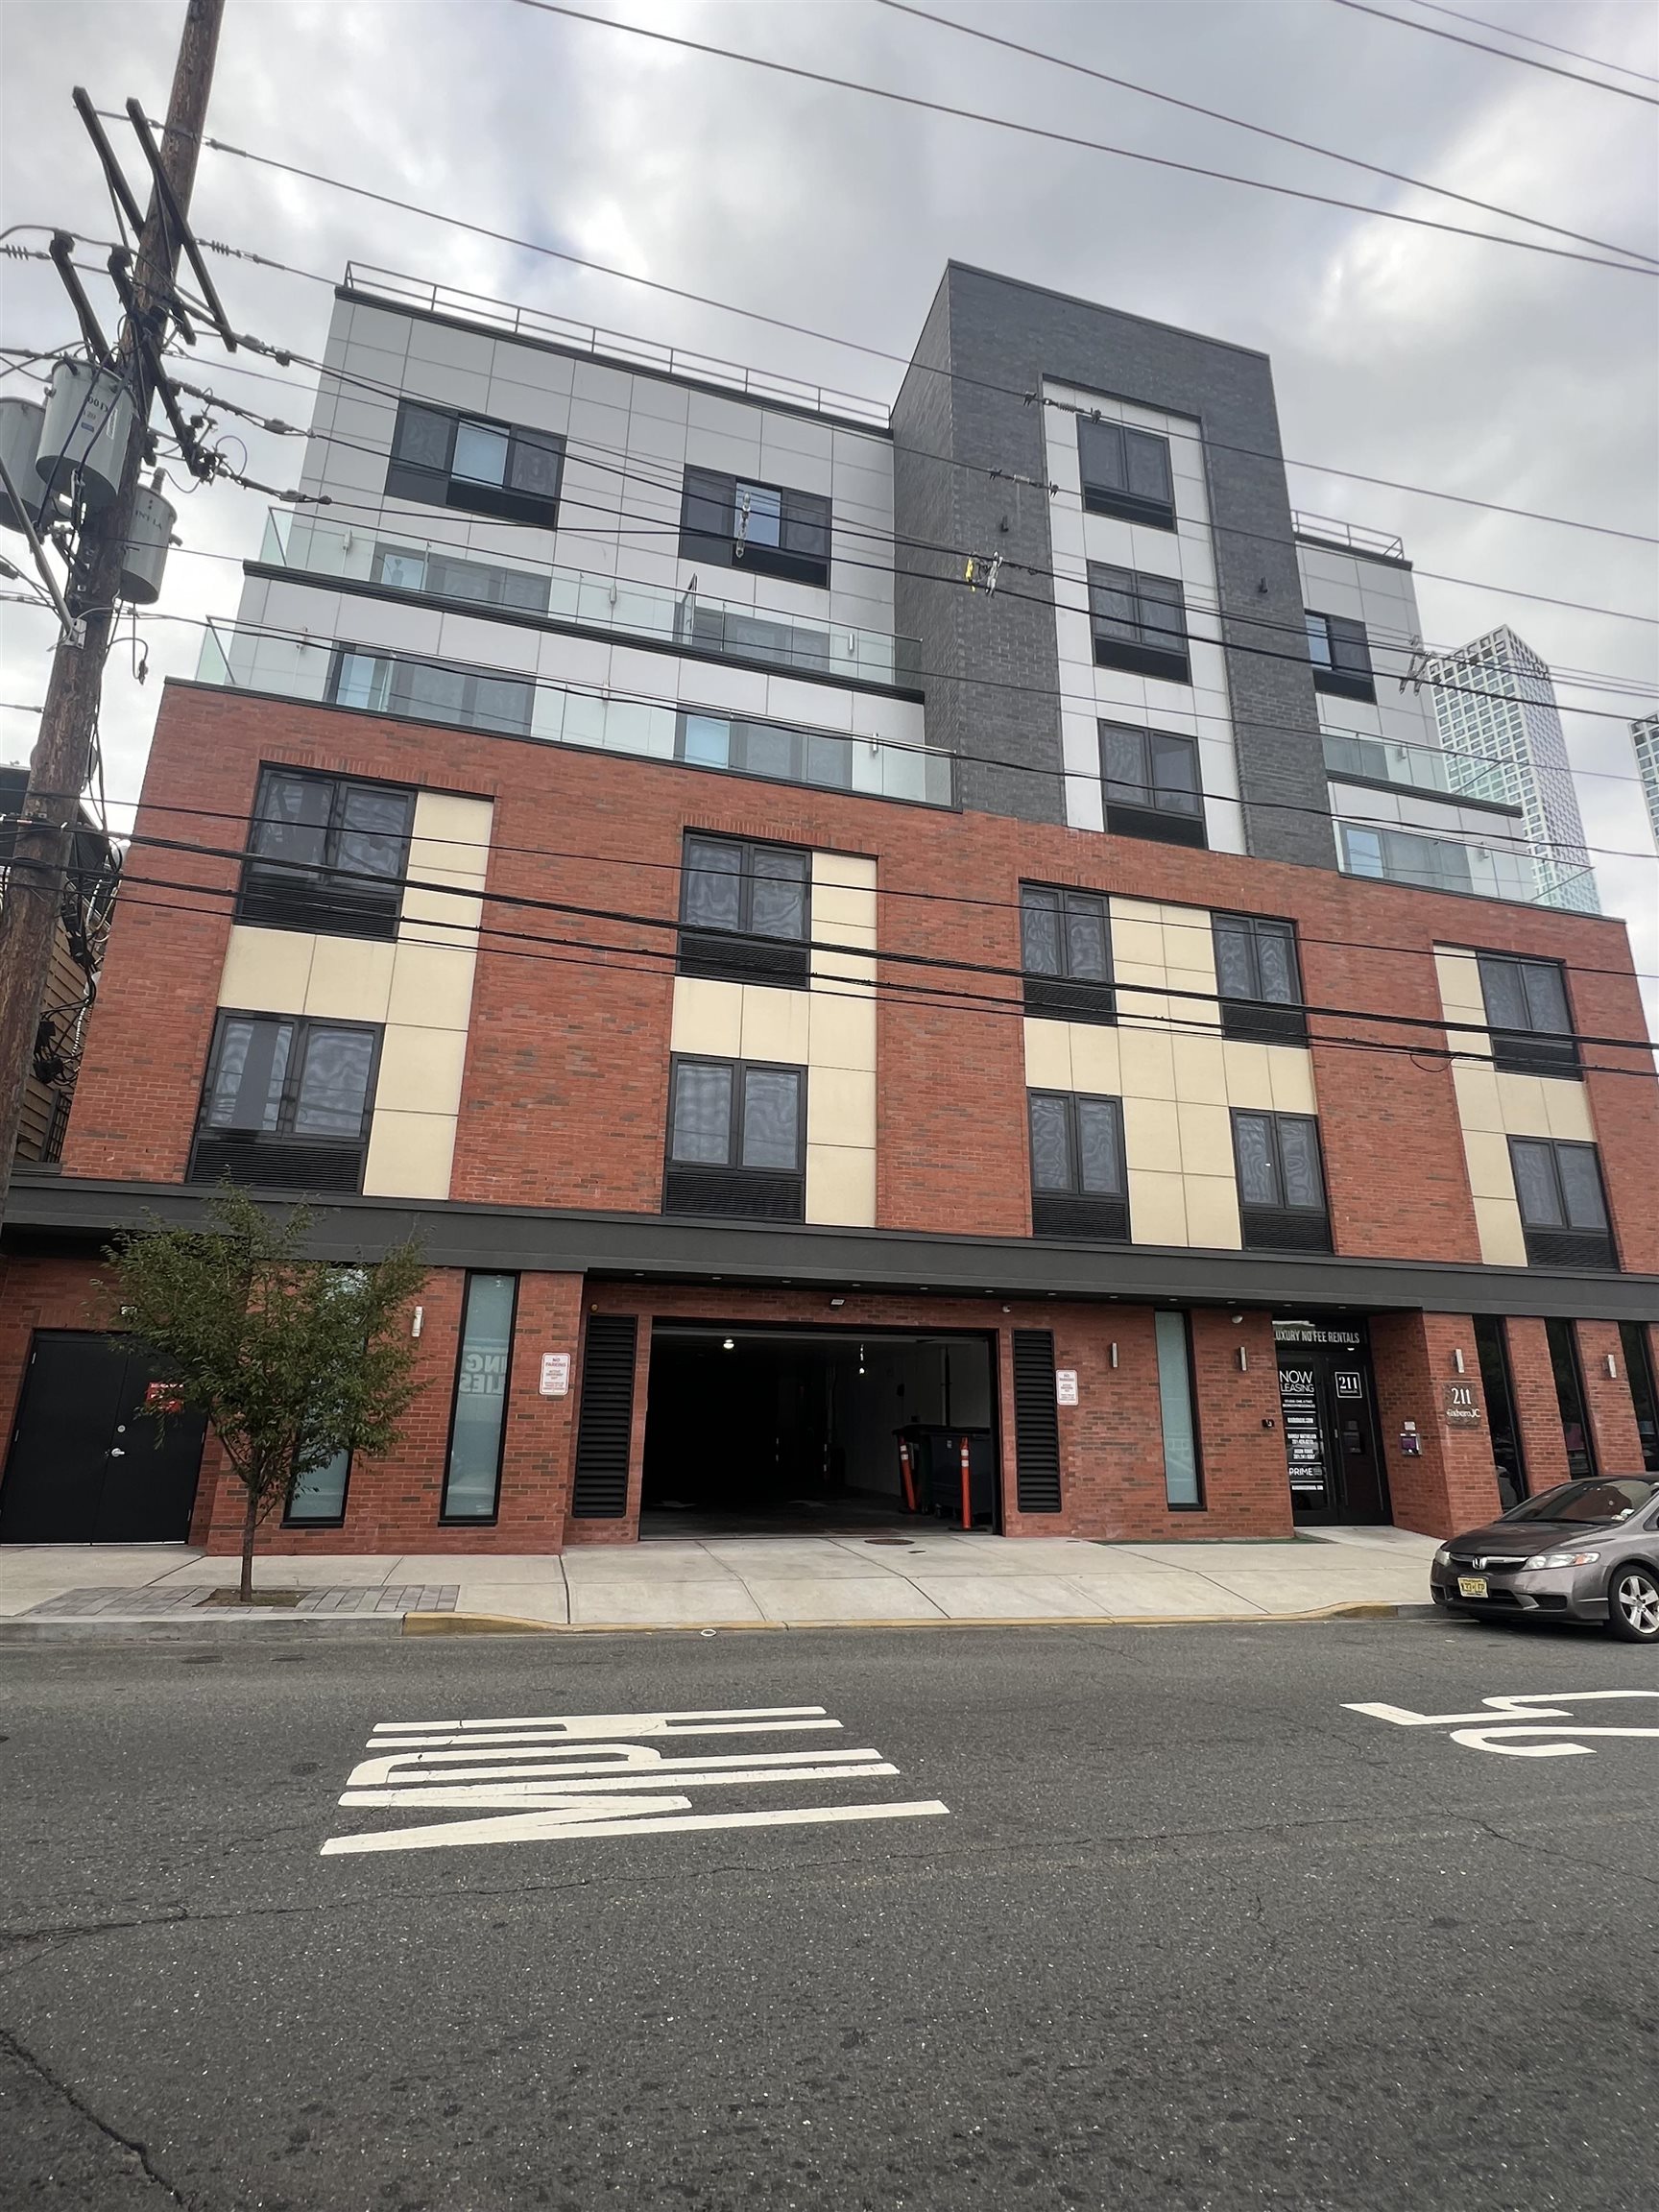 # 240003843 - For Rent in JERSEY CITY - Journal Square NJ